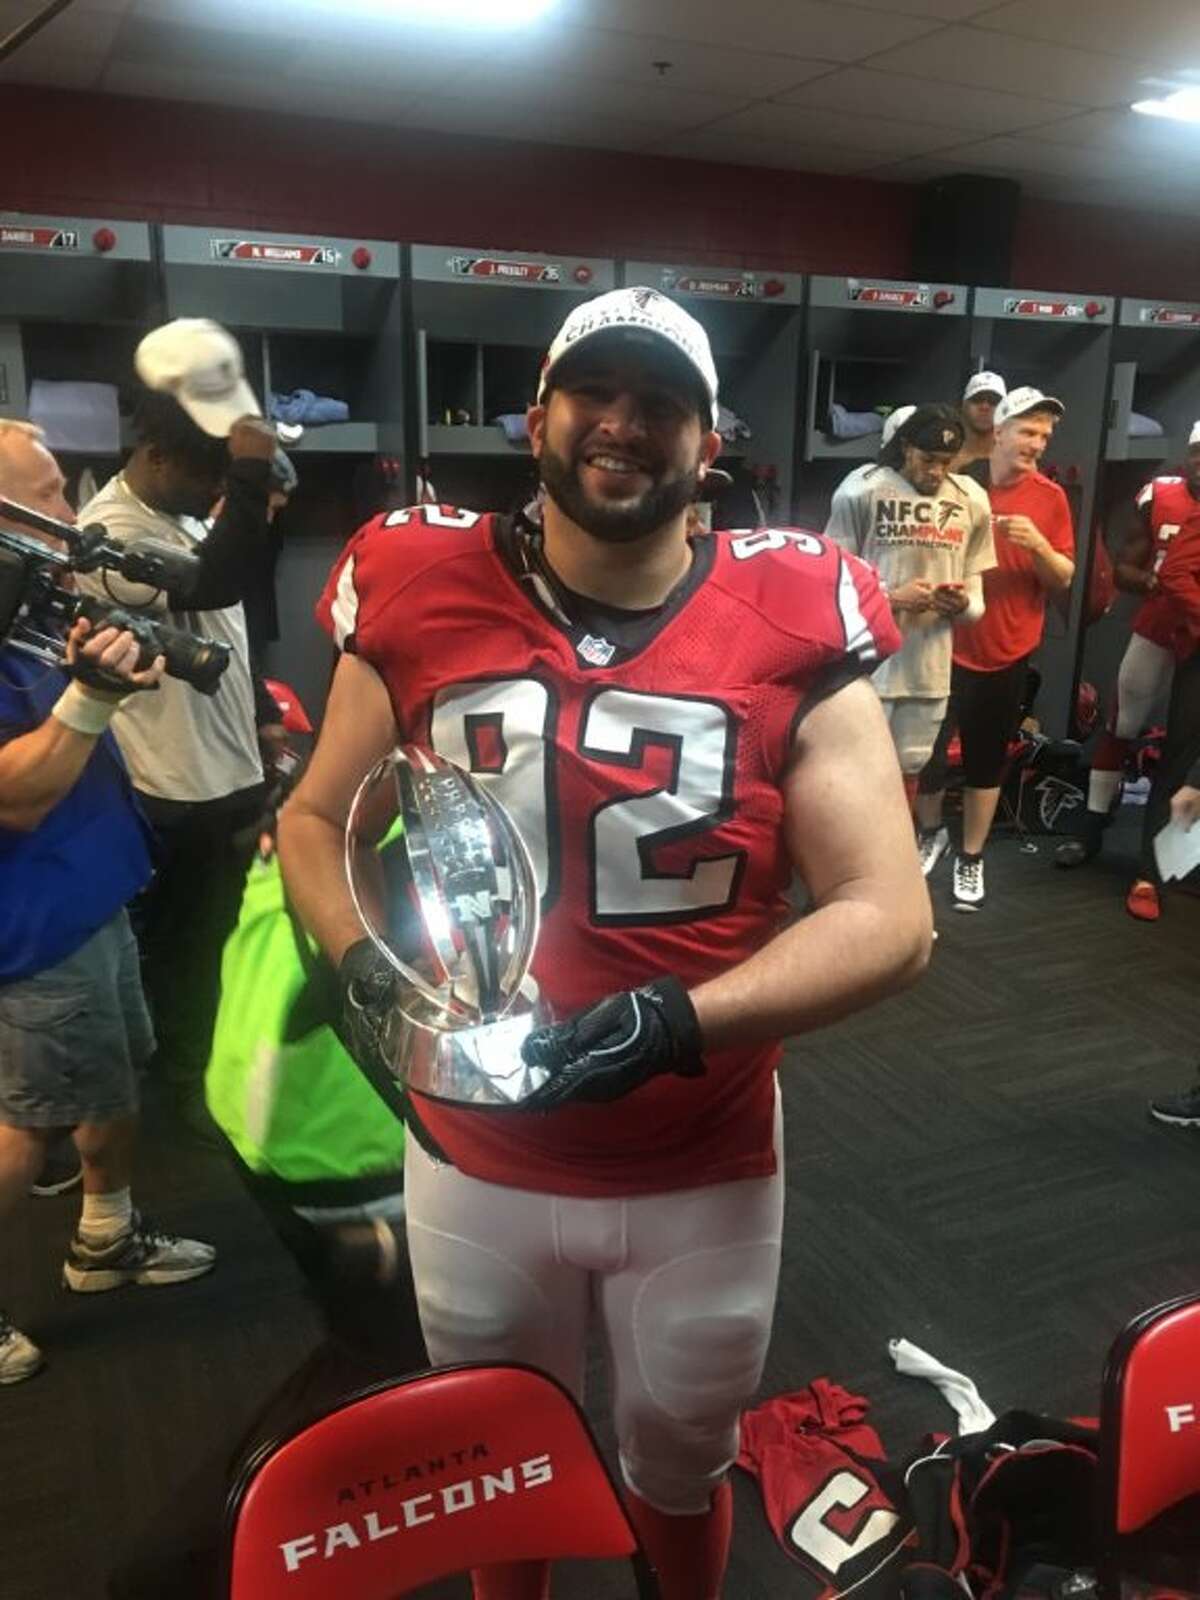 CBA graduate and Clifton Park native Joe Vellano poses with the NFC championshpi trophy Sunday, Jan. 22, 2017, after his Atlanta Falcons defeated the Green Bay Packers 44-21 to advance to Super Bowl LI in Houston. (Photo courtesy Paul Vellano)